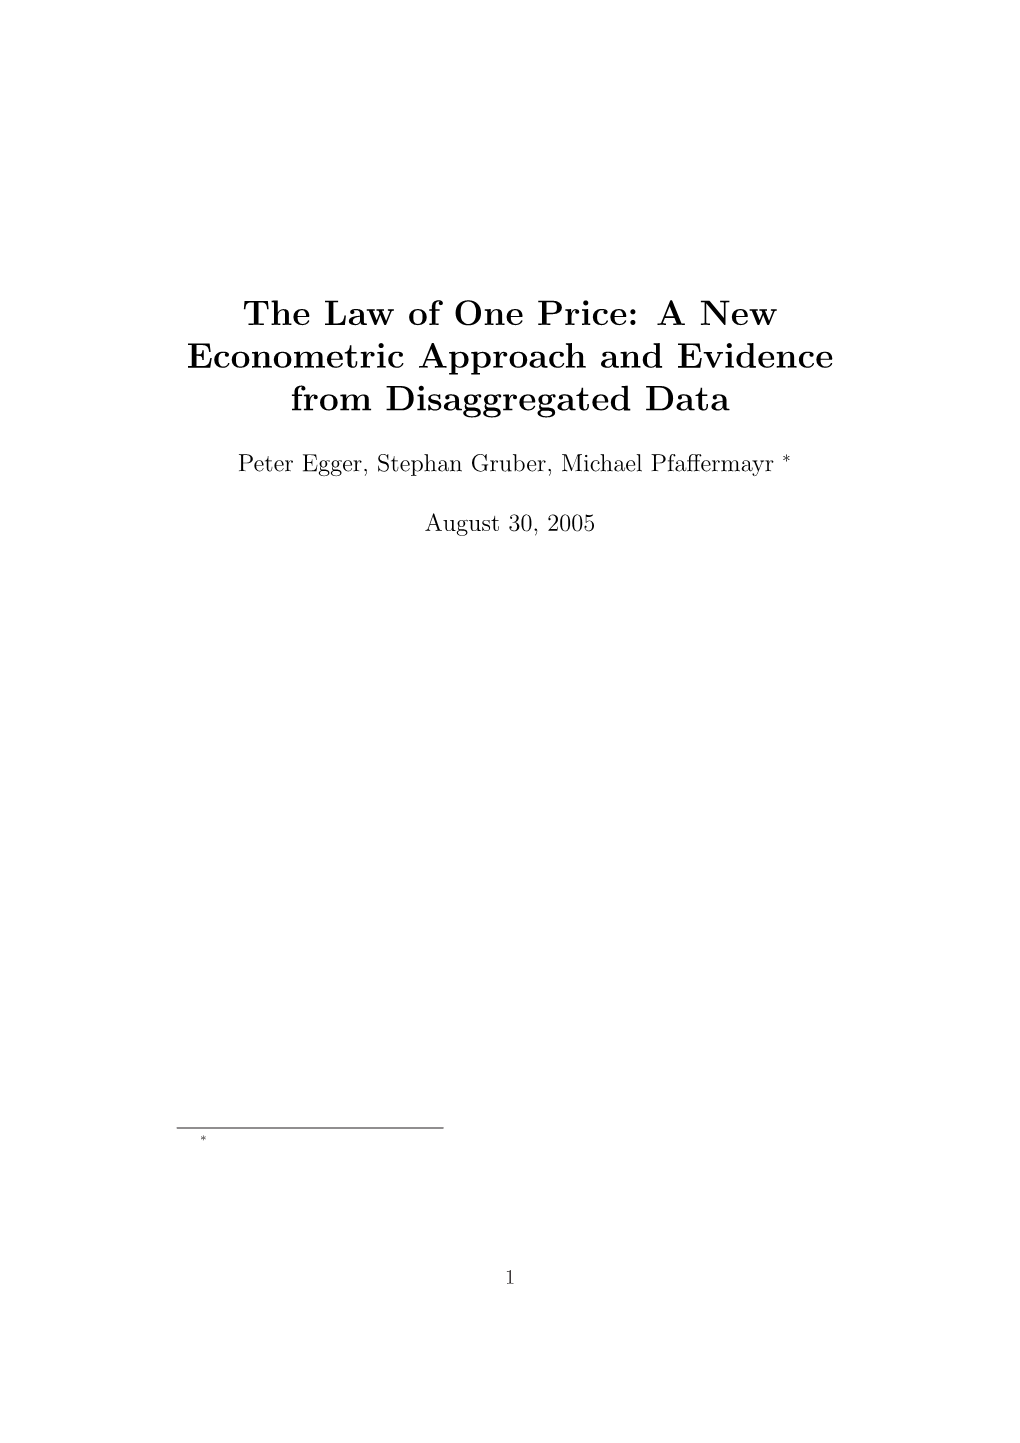 The Law of One Price: a New Econometric Approach and Evidence from Disaggregated Data